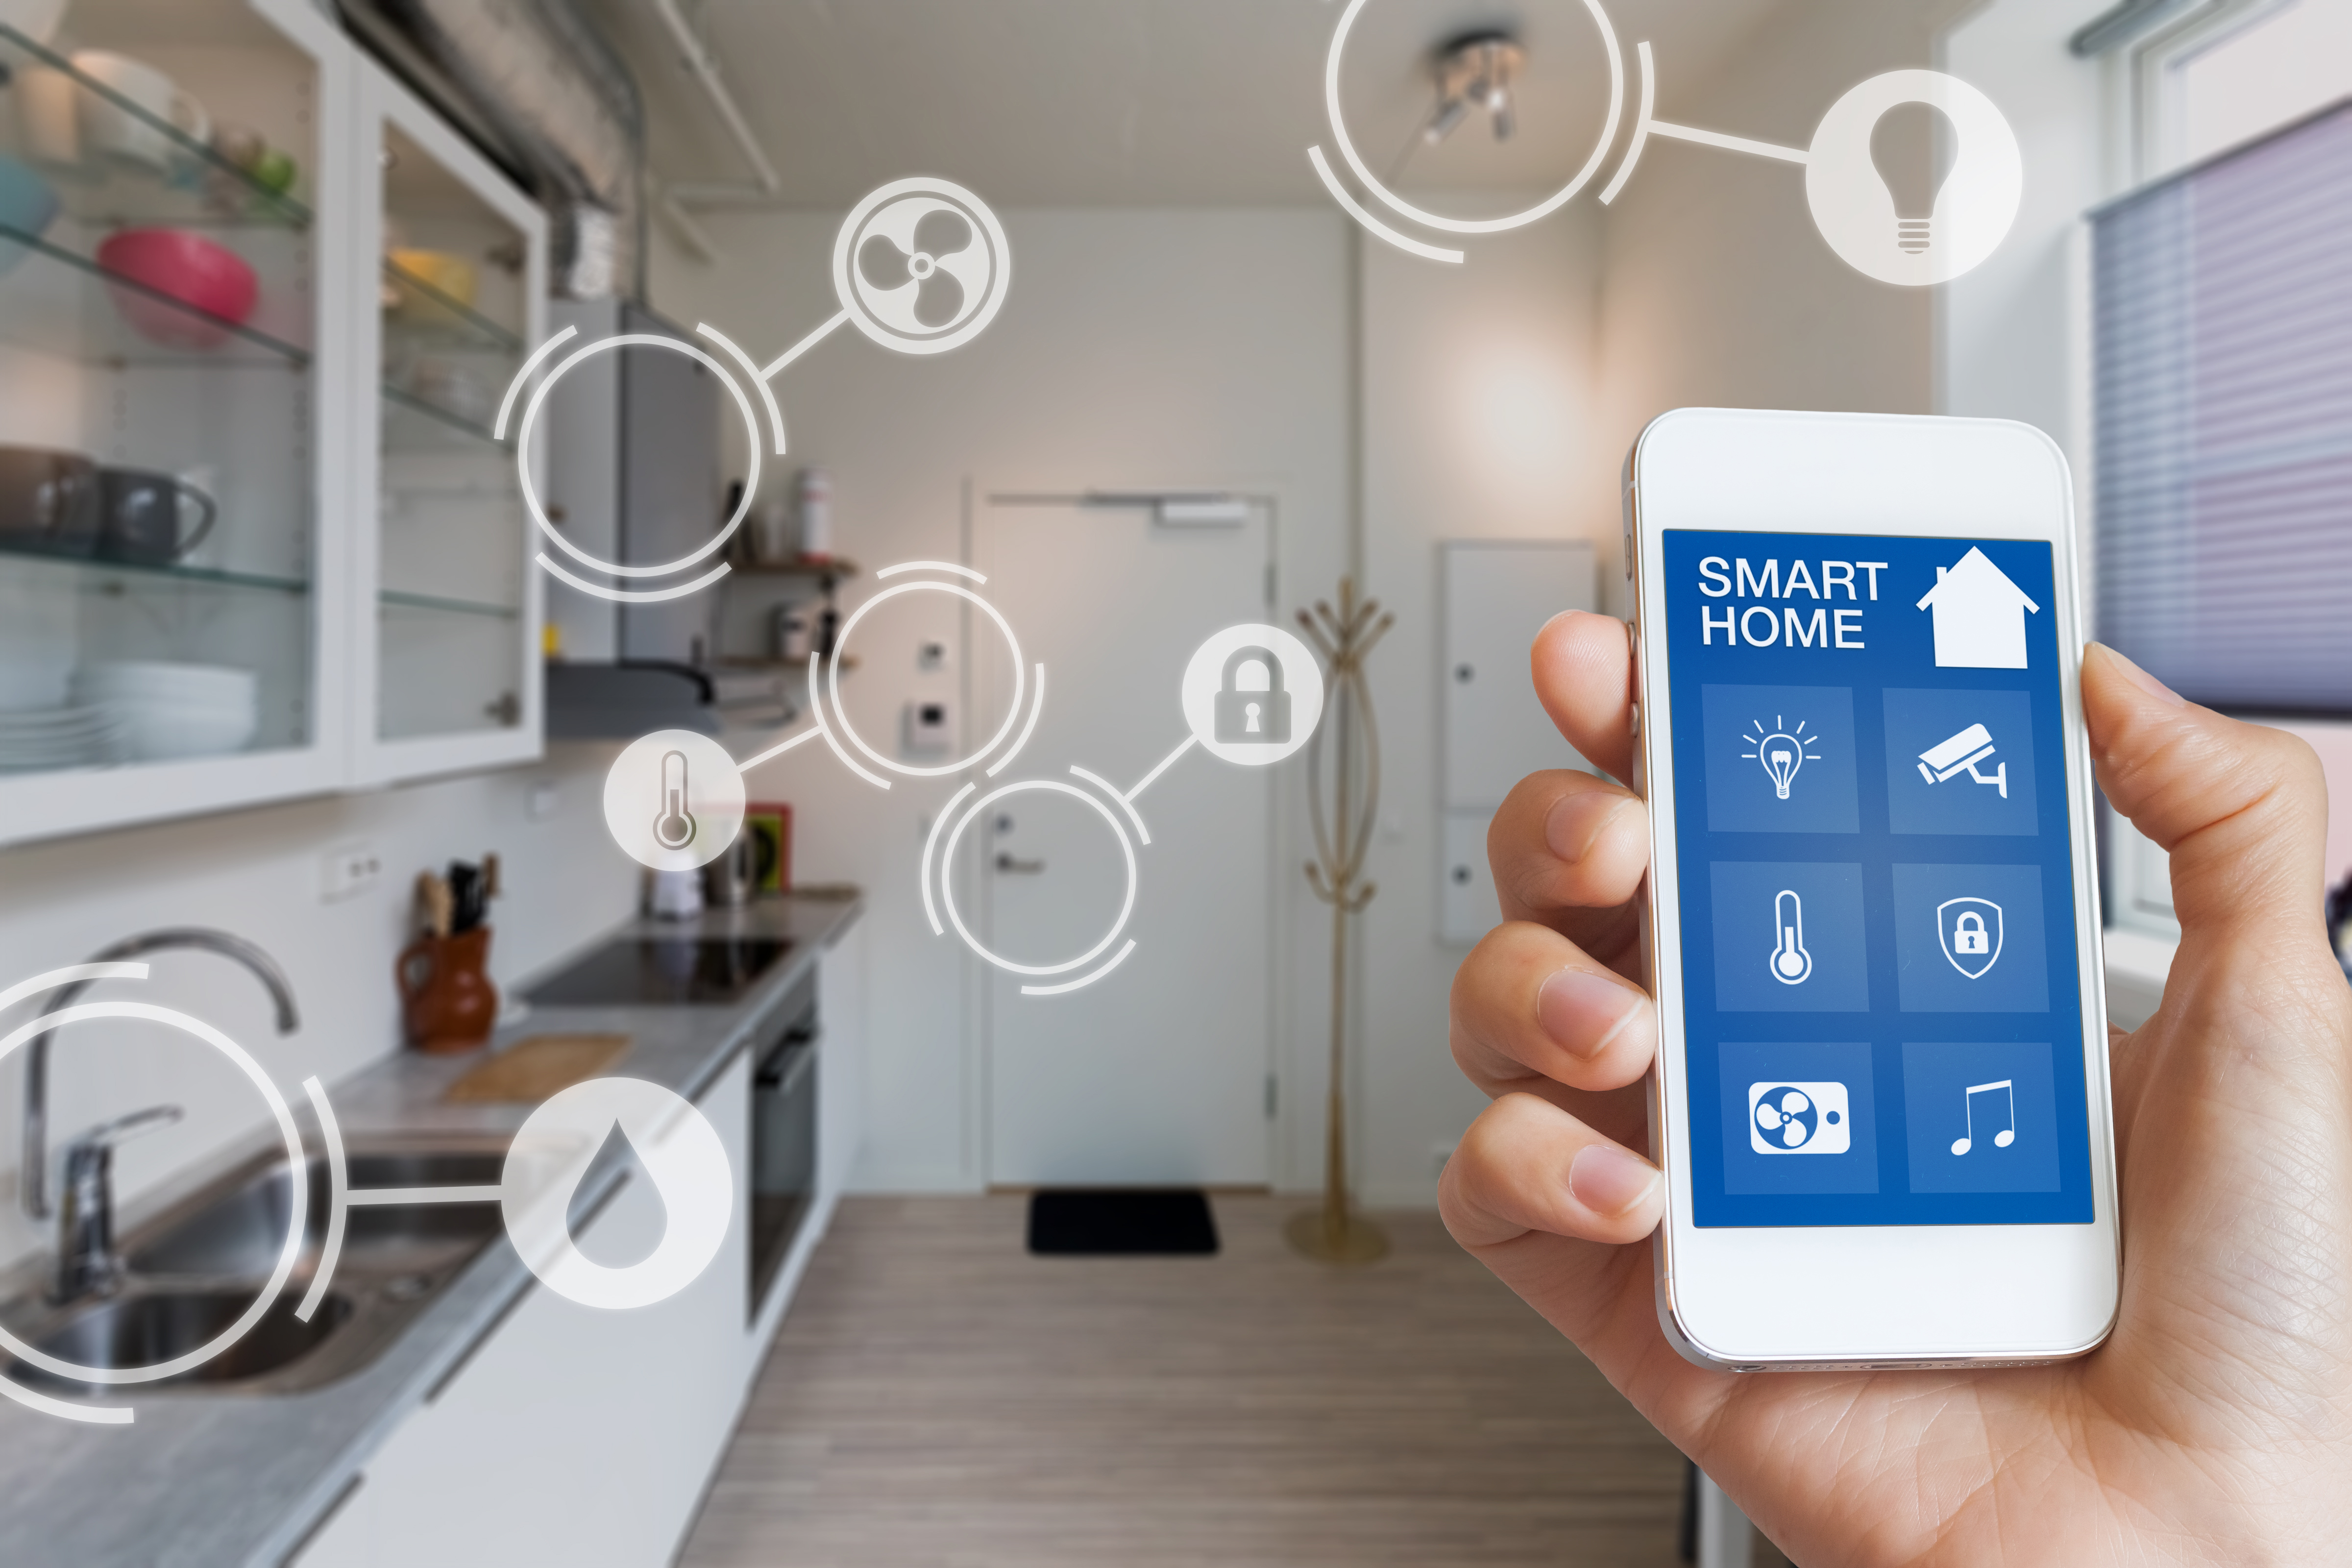 Smart home smarts: Product reviews and ratings for home automation